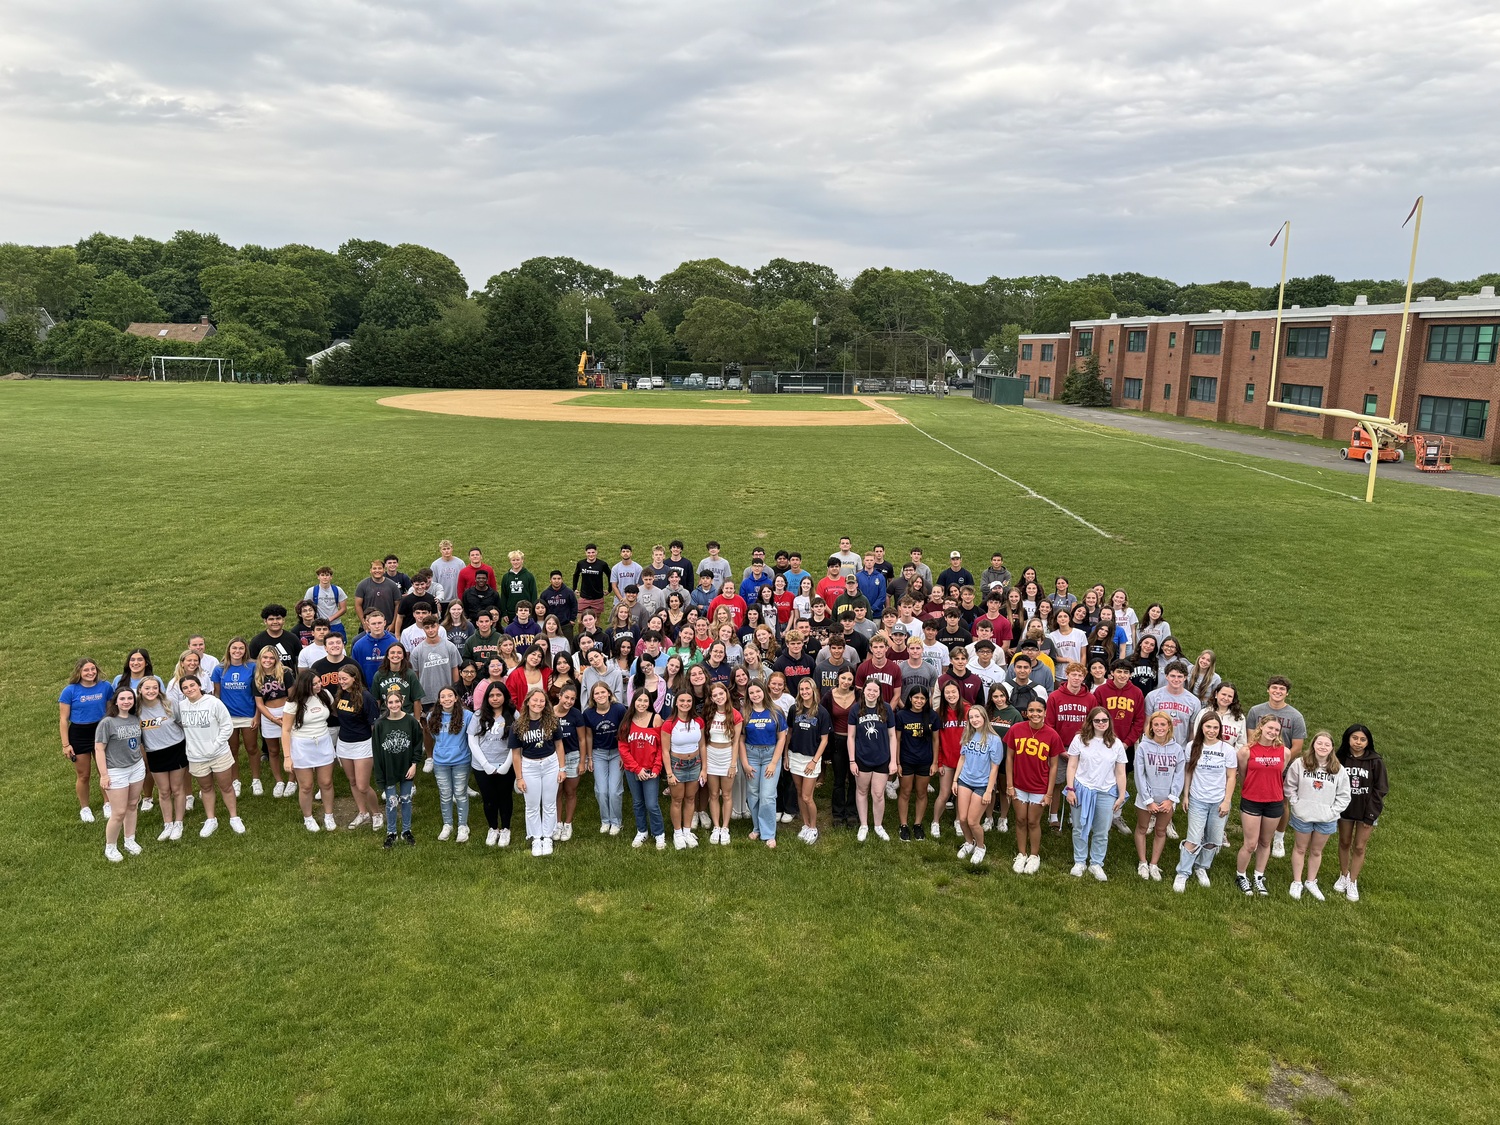 As a symbol of their commitment to the pursuit of higher education, the Westhampton Beach High School Class of 2024 wore the apparel of their college of choice on June 3. The class will be heading to a number of premier schools this fall, including Cornell University, Boston University, Brown University, Stony Brook University and Princeton University. “We are incredibly proud of the Class of 2024,” said Principal Dr. Christopher Herr. “They have made their mark on Westhampton Beach High School, and we wish them the very best in the future.” COURTESY WESTHAMPTON BEACH SCHOOL DISTRICT